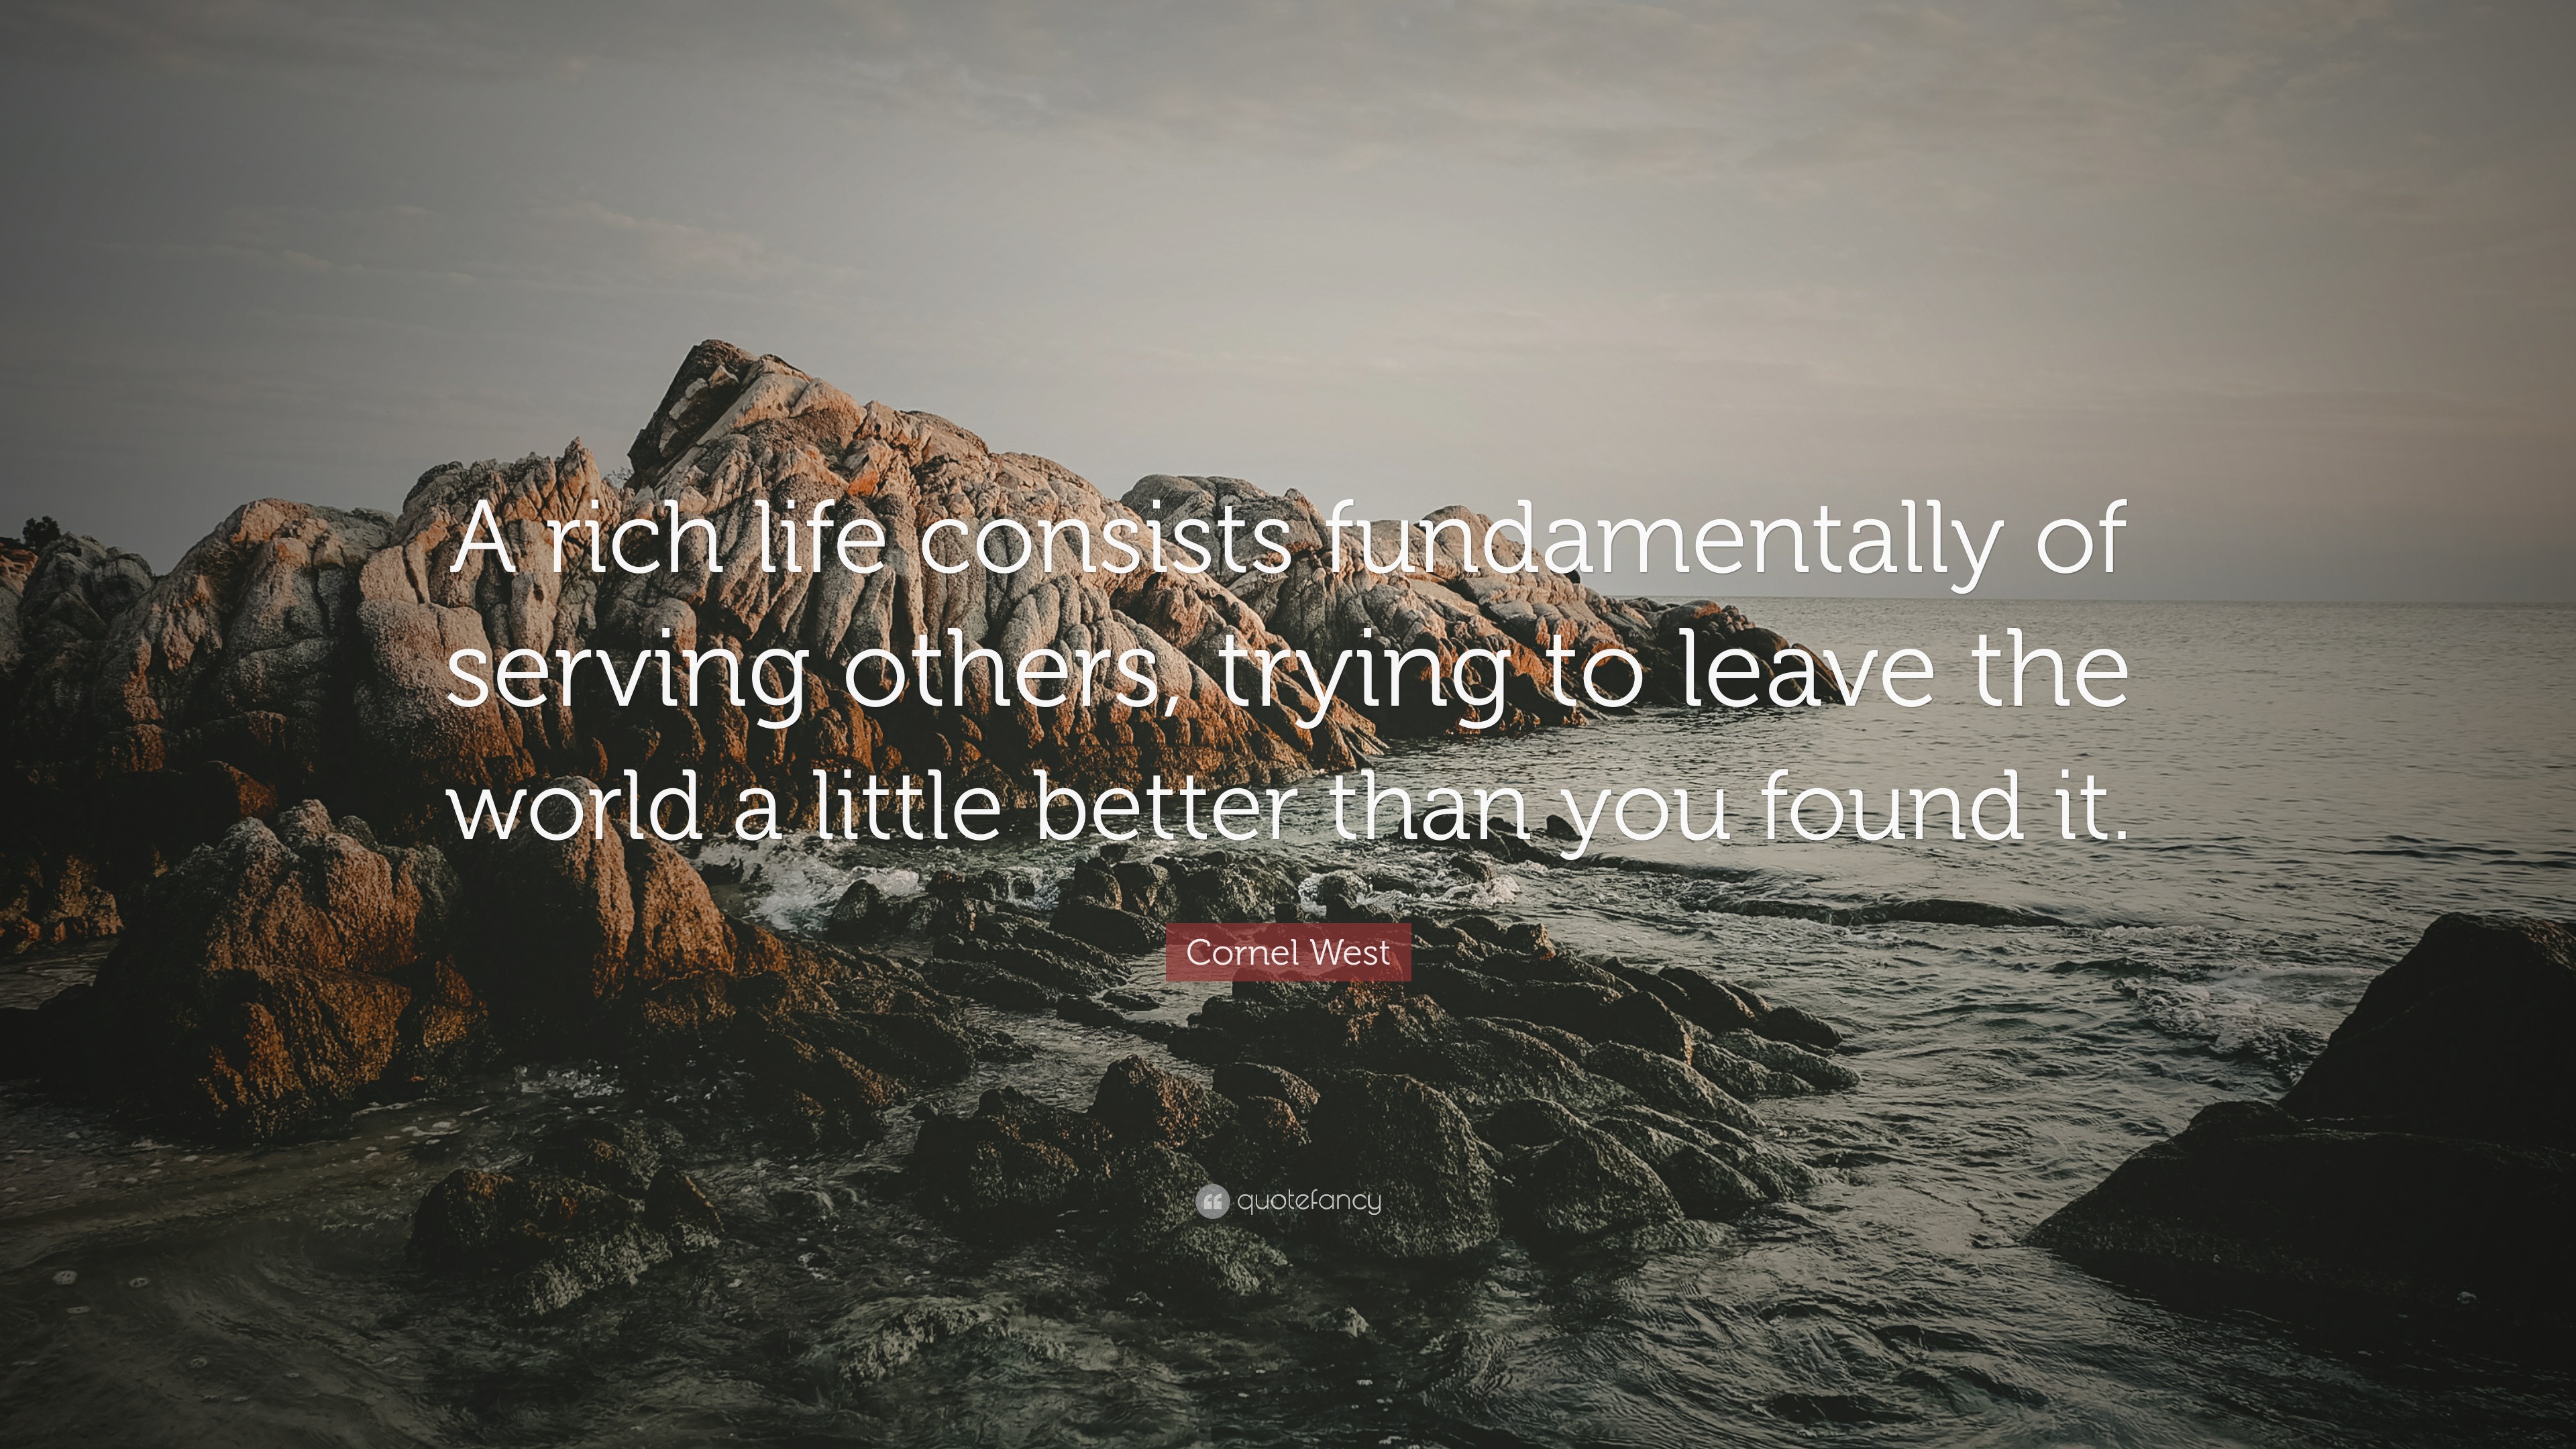 Cornel West Quote: “A rich life consists fundamentally of serving others,  trying to leave the world